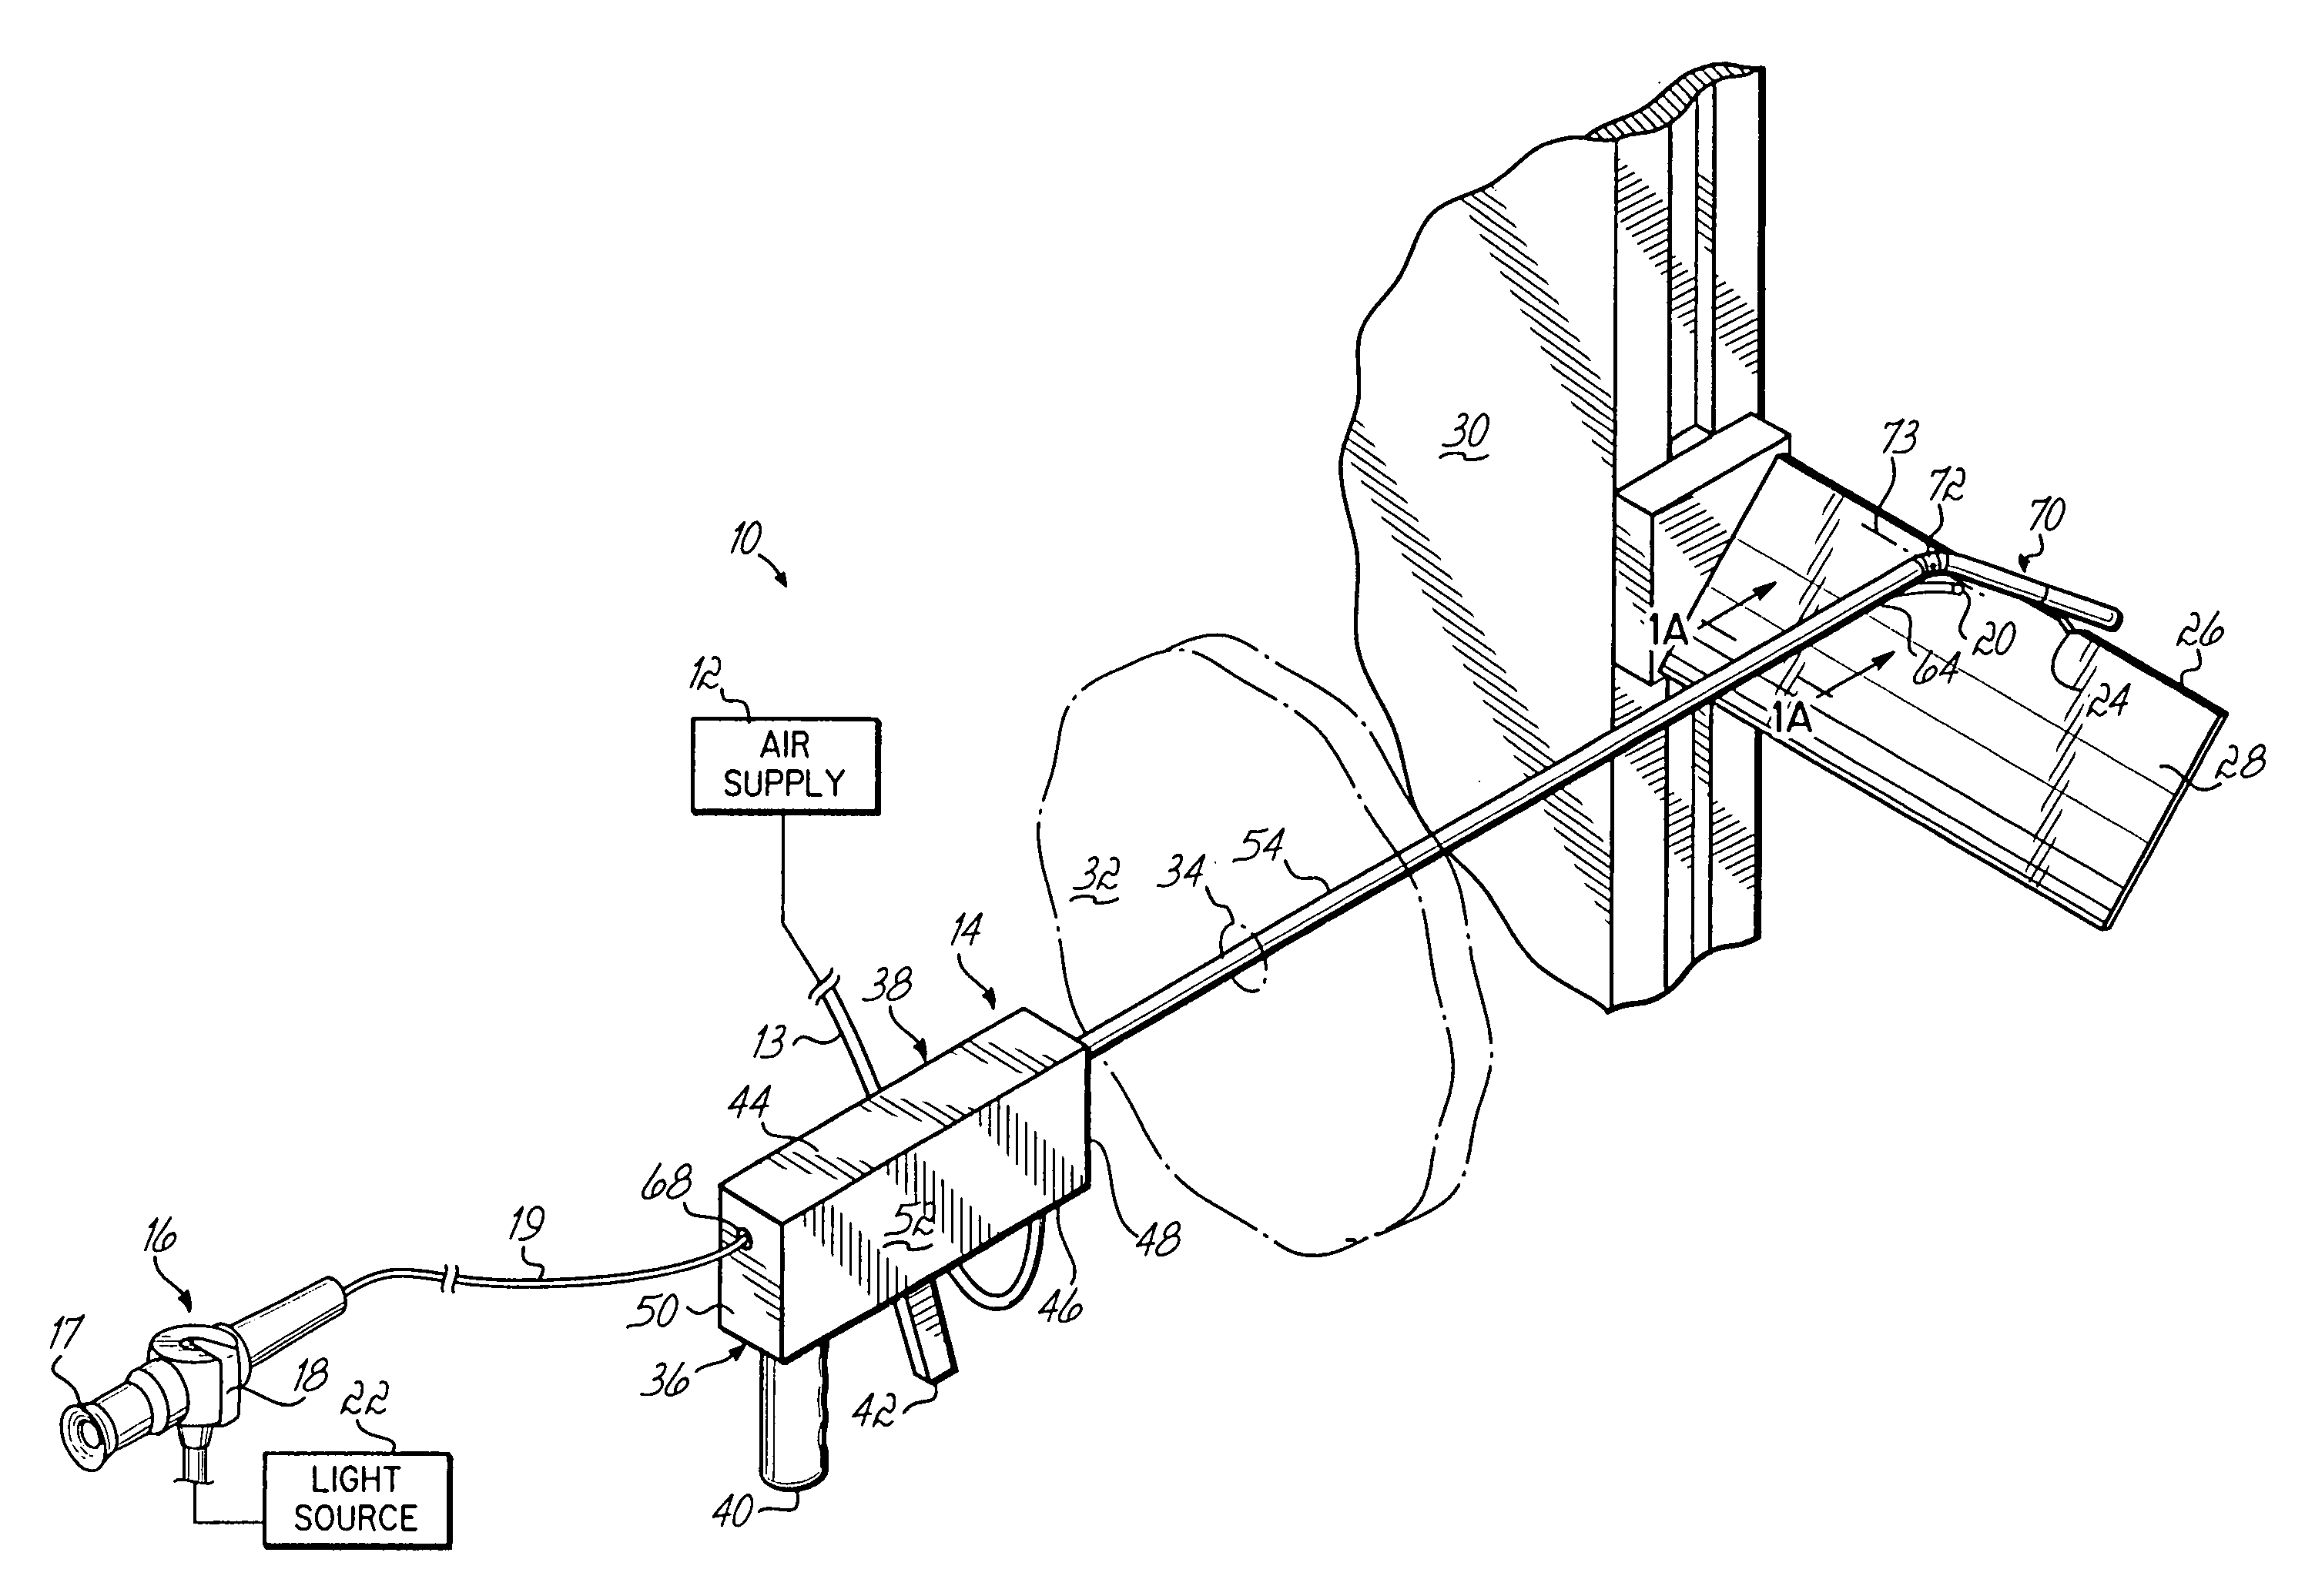 Grinding apparatus for blending defects on turbine blades and associated method of use